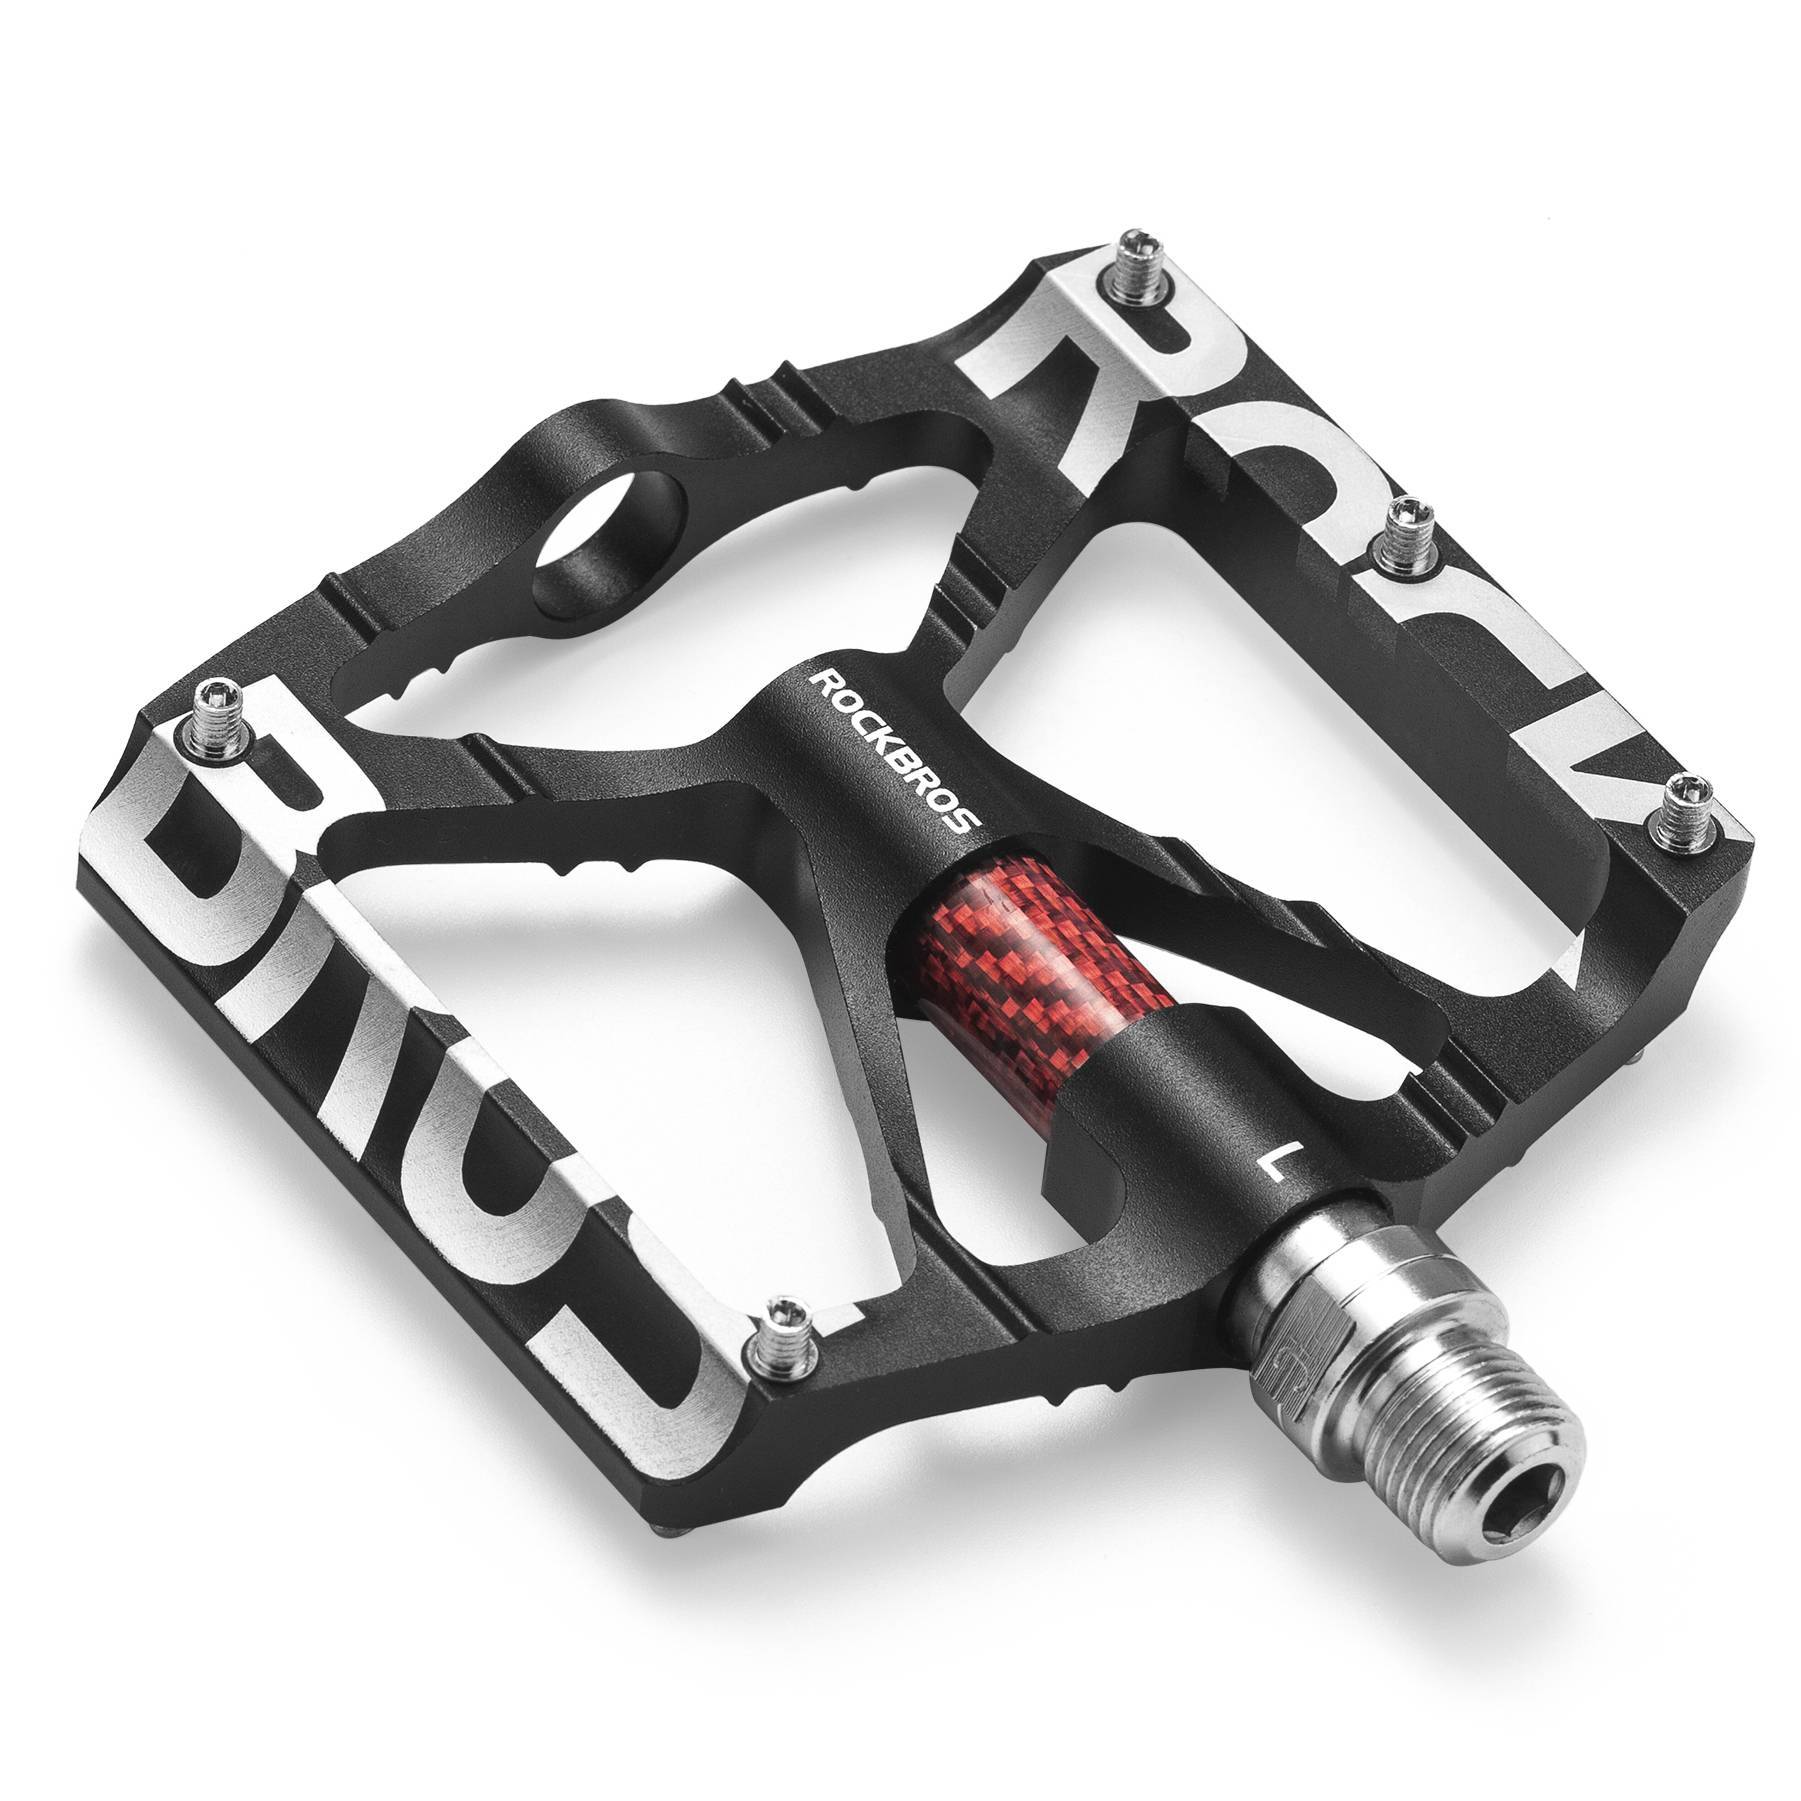 ROCKBROS bicycle pedals 9/16 inch aluminum MTB pedals with sealed bearings